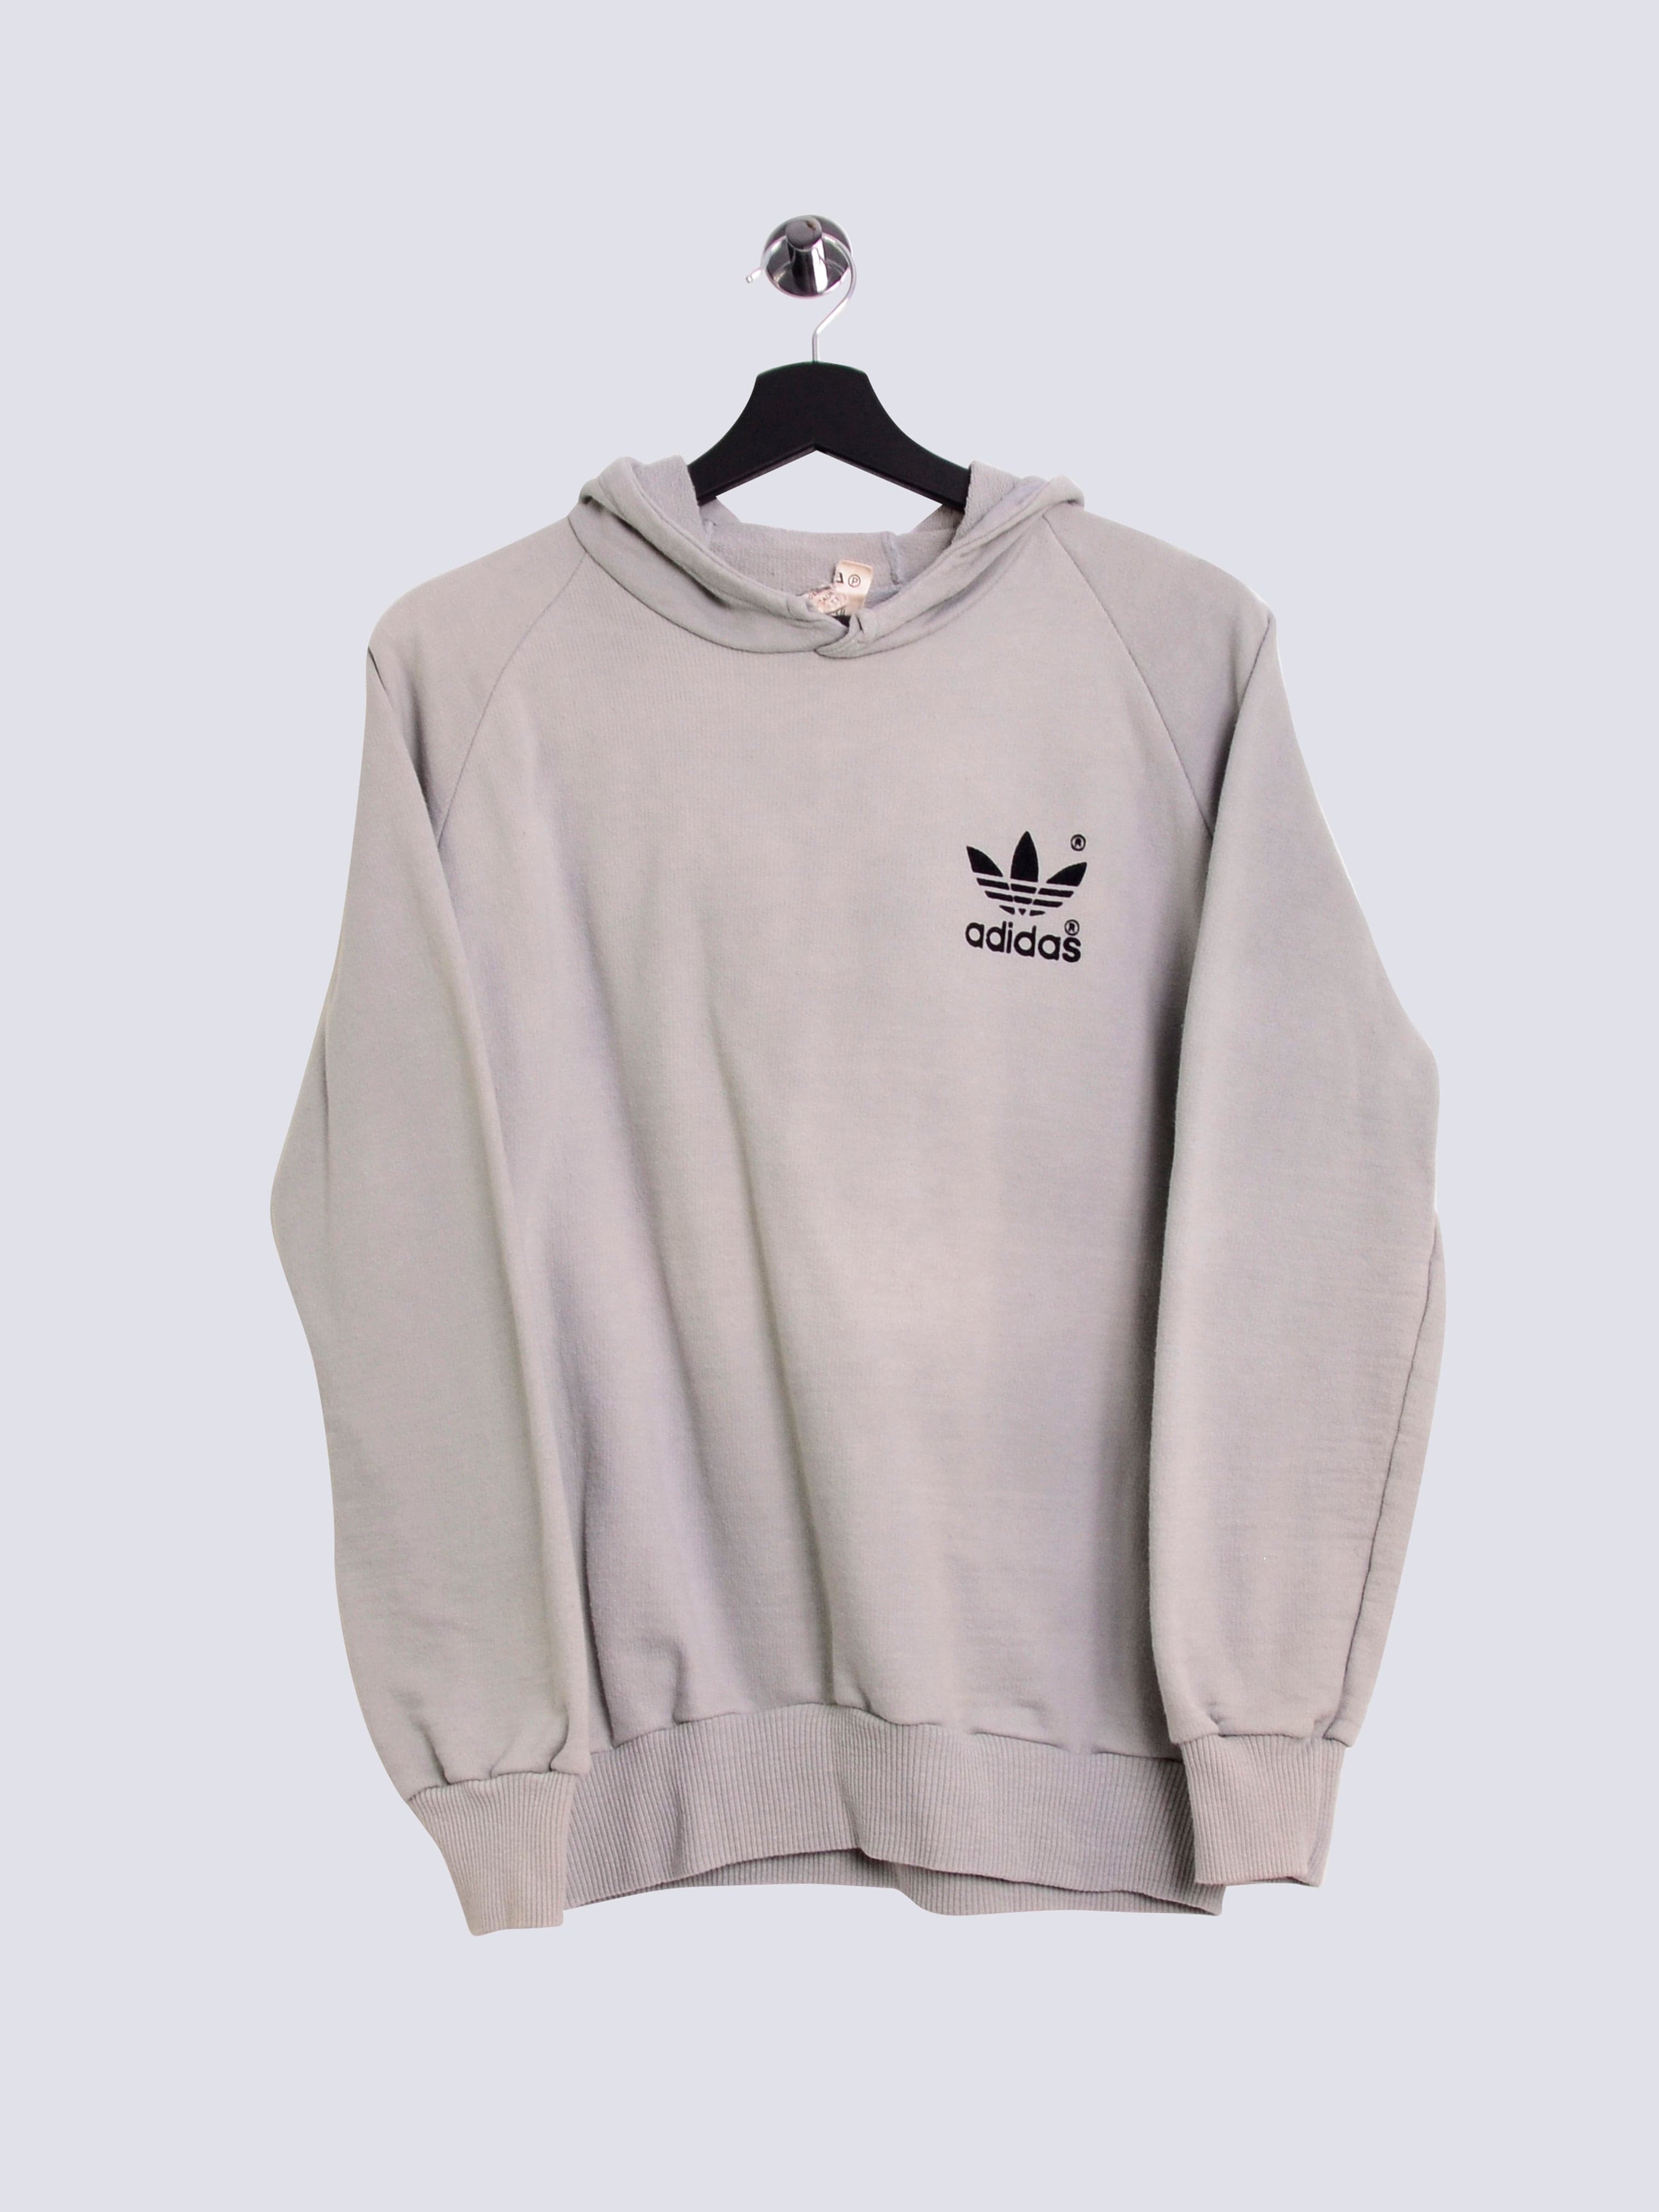 Adidas Embroidered Logo Hoodie Grey // X-Small - RHAGHOUSE VINTAGE